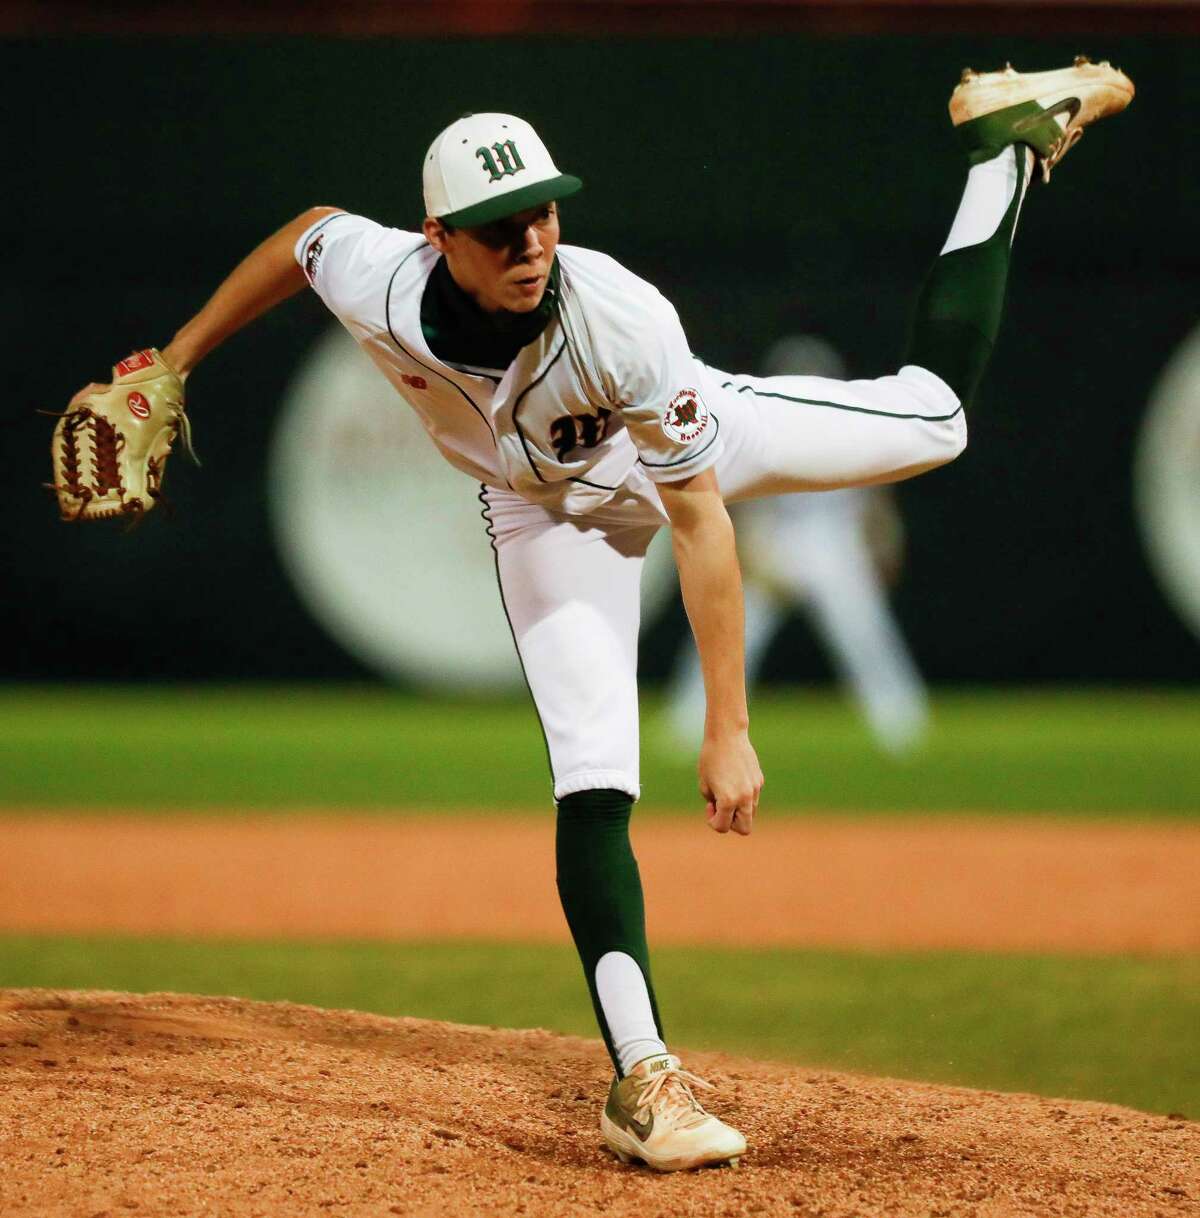 The Woodlands pitcher Brayden Sharp (21), shown here last season, pitched a perfect game at Conroe Wednesday night.